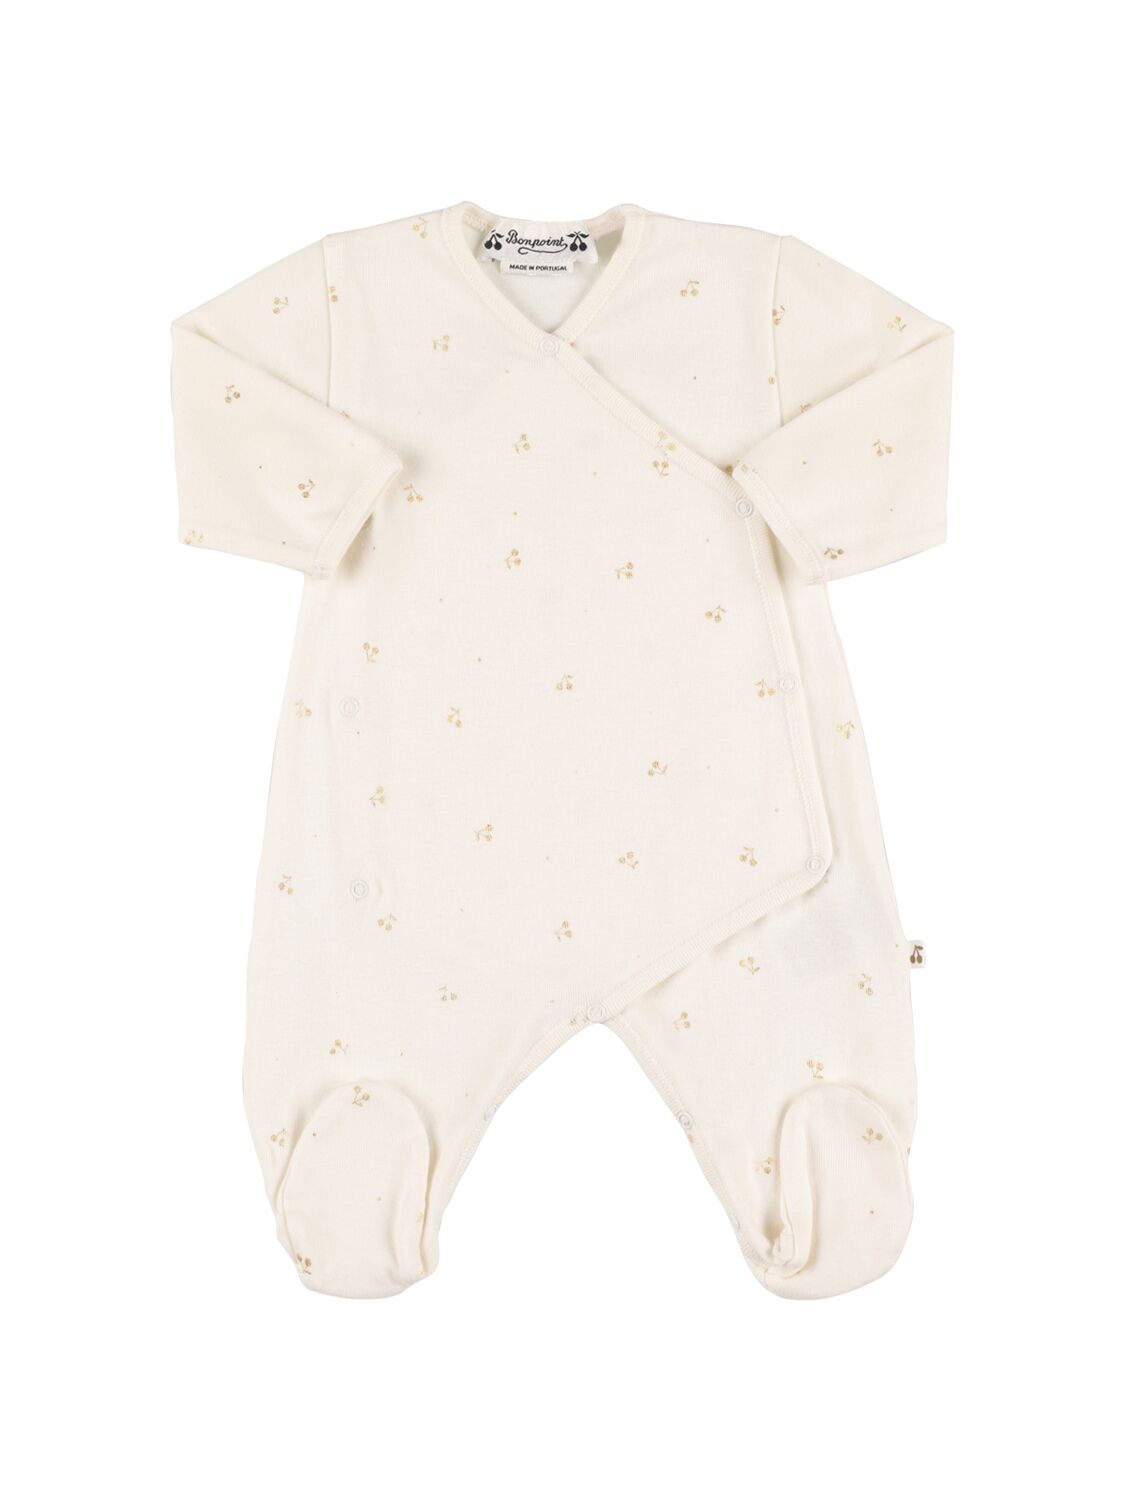 Bonpoint Babies' Cotton Romper In Gold